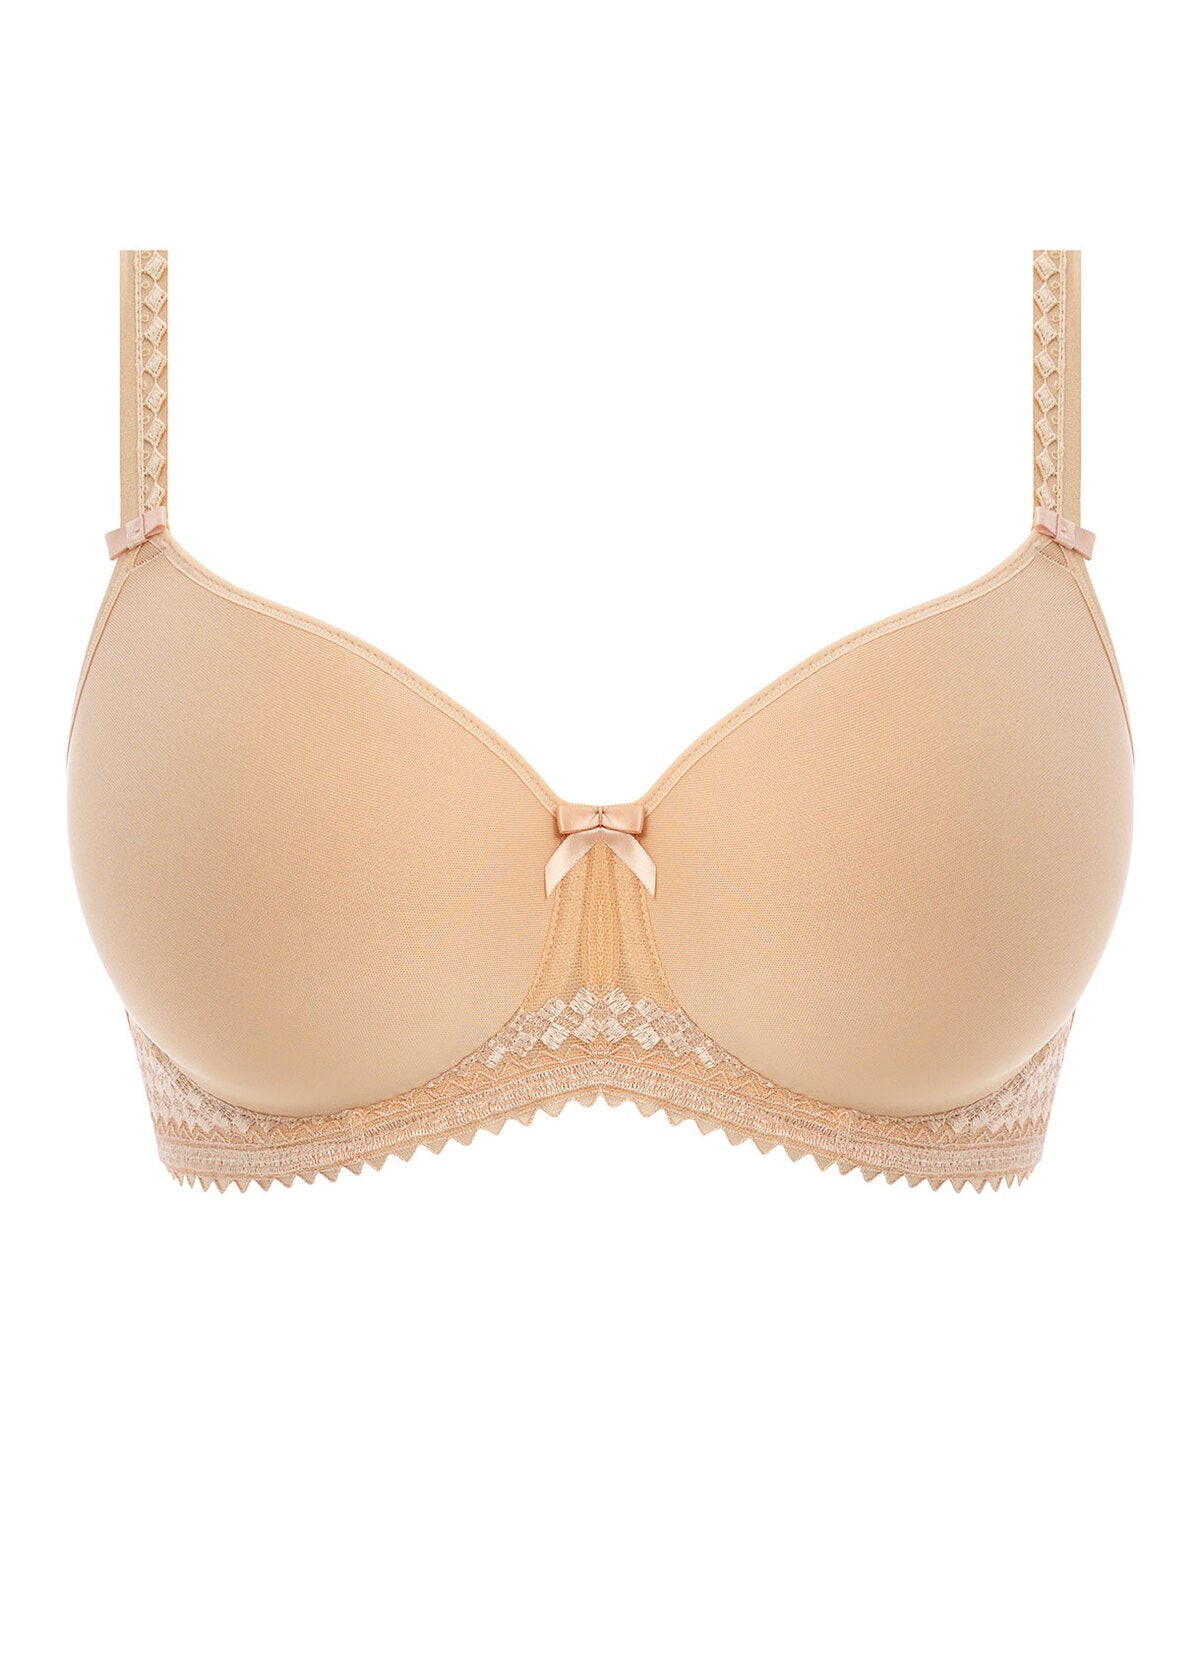 Fantasie Rebecca Full Cup Moulded Bra - Nude 1 Shaws Department Stores